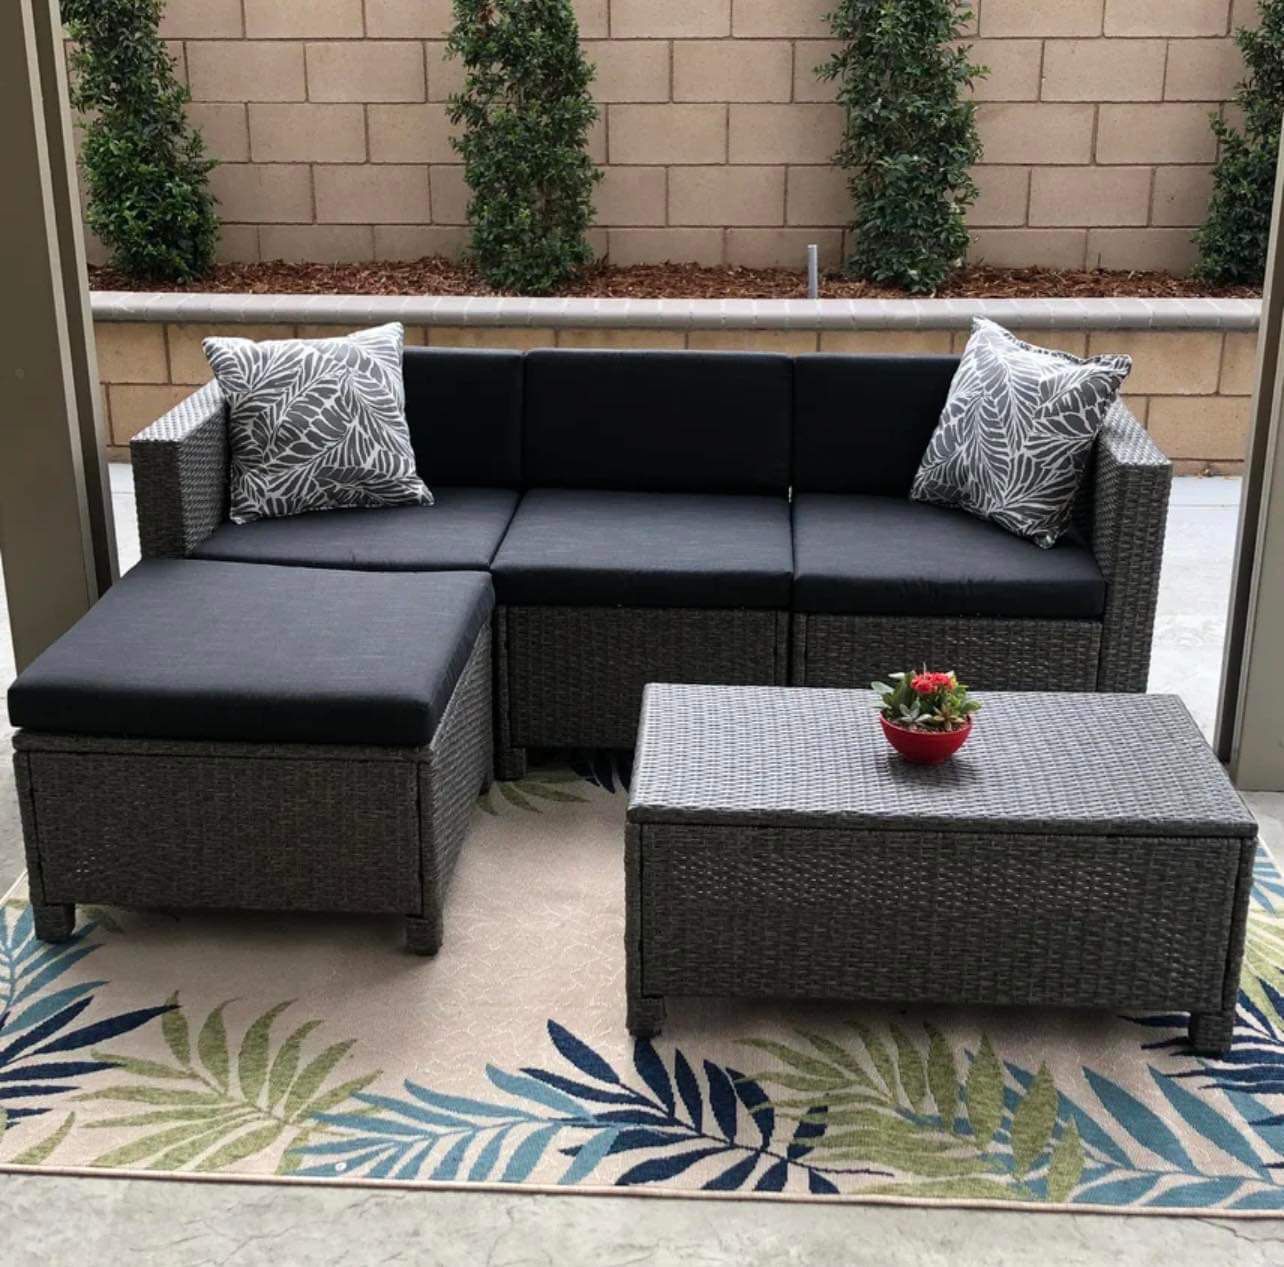 Patio Furniture Set New in Original Packaging 5-Piece Sofa Set Retailed For $759.99.